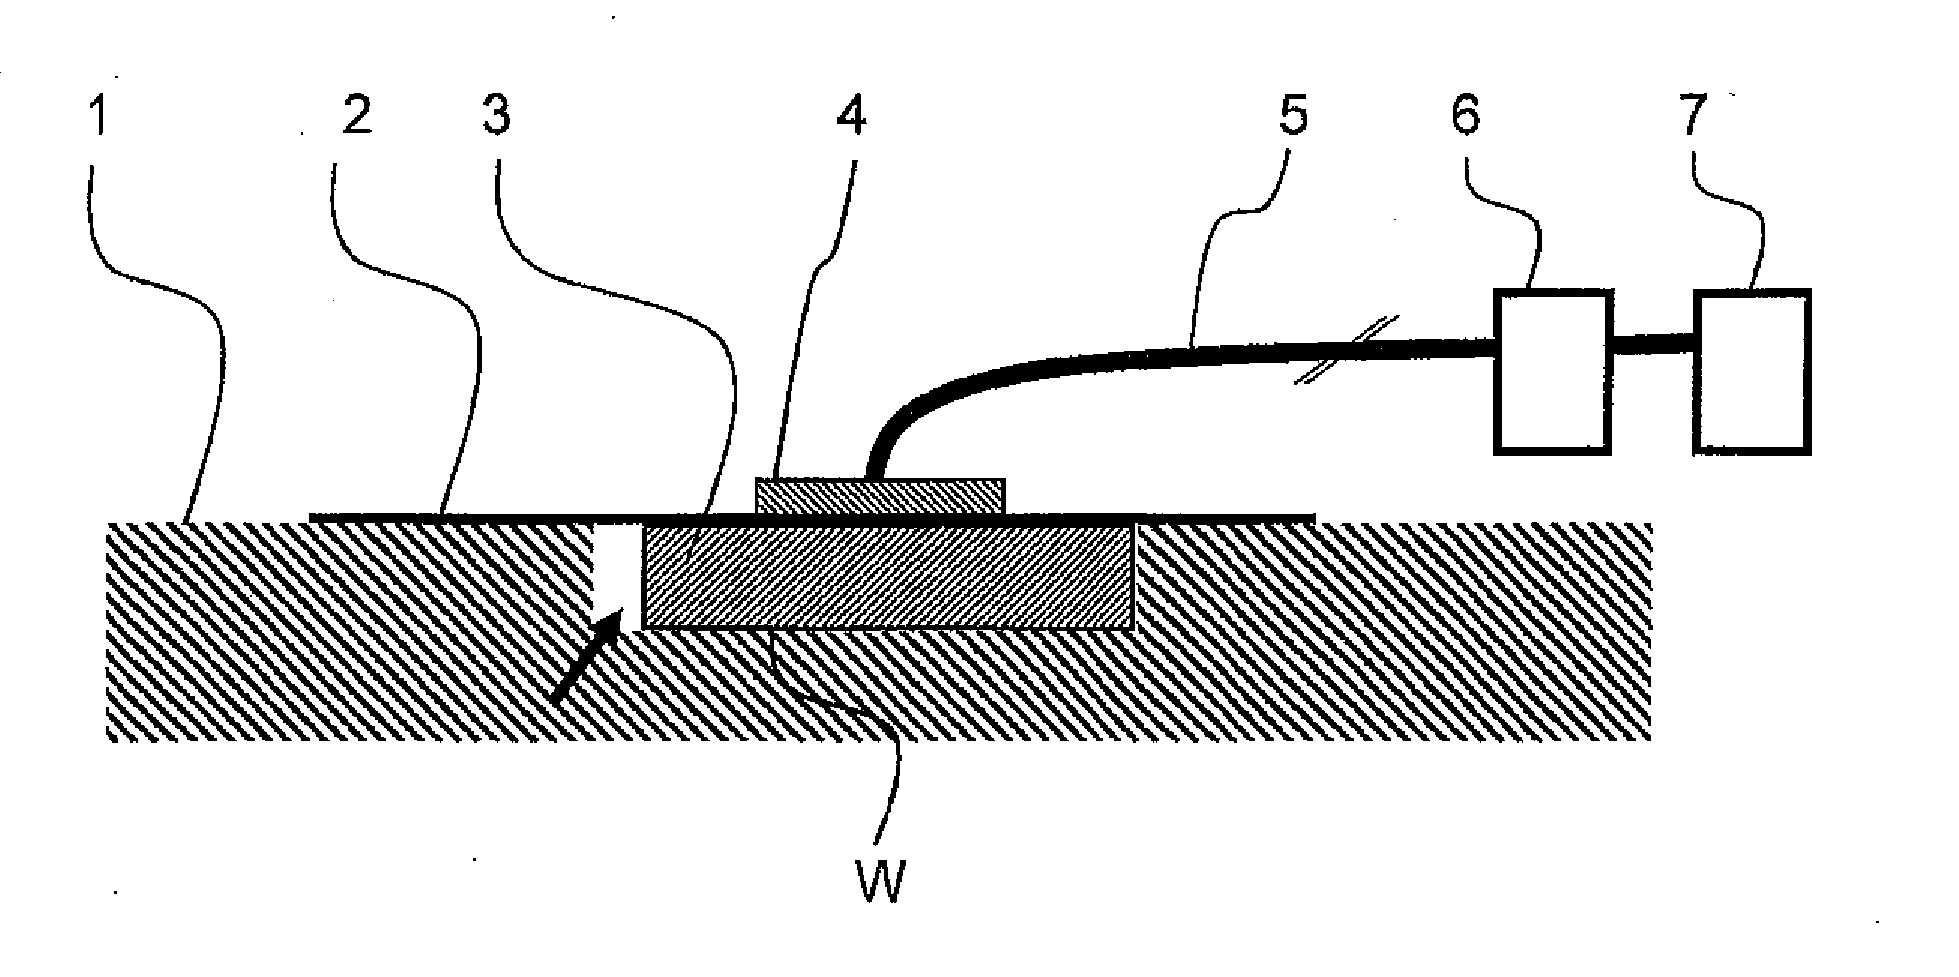 Element for facilitating the cutting to size of a dressing for vacuum therapy of a wound